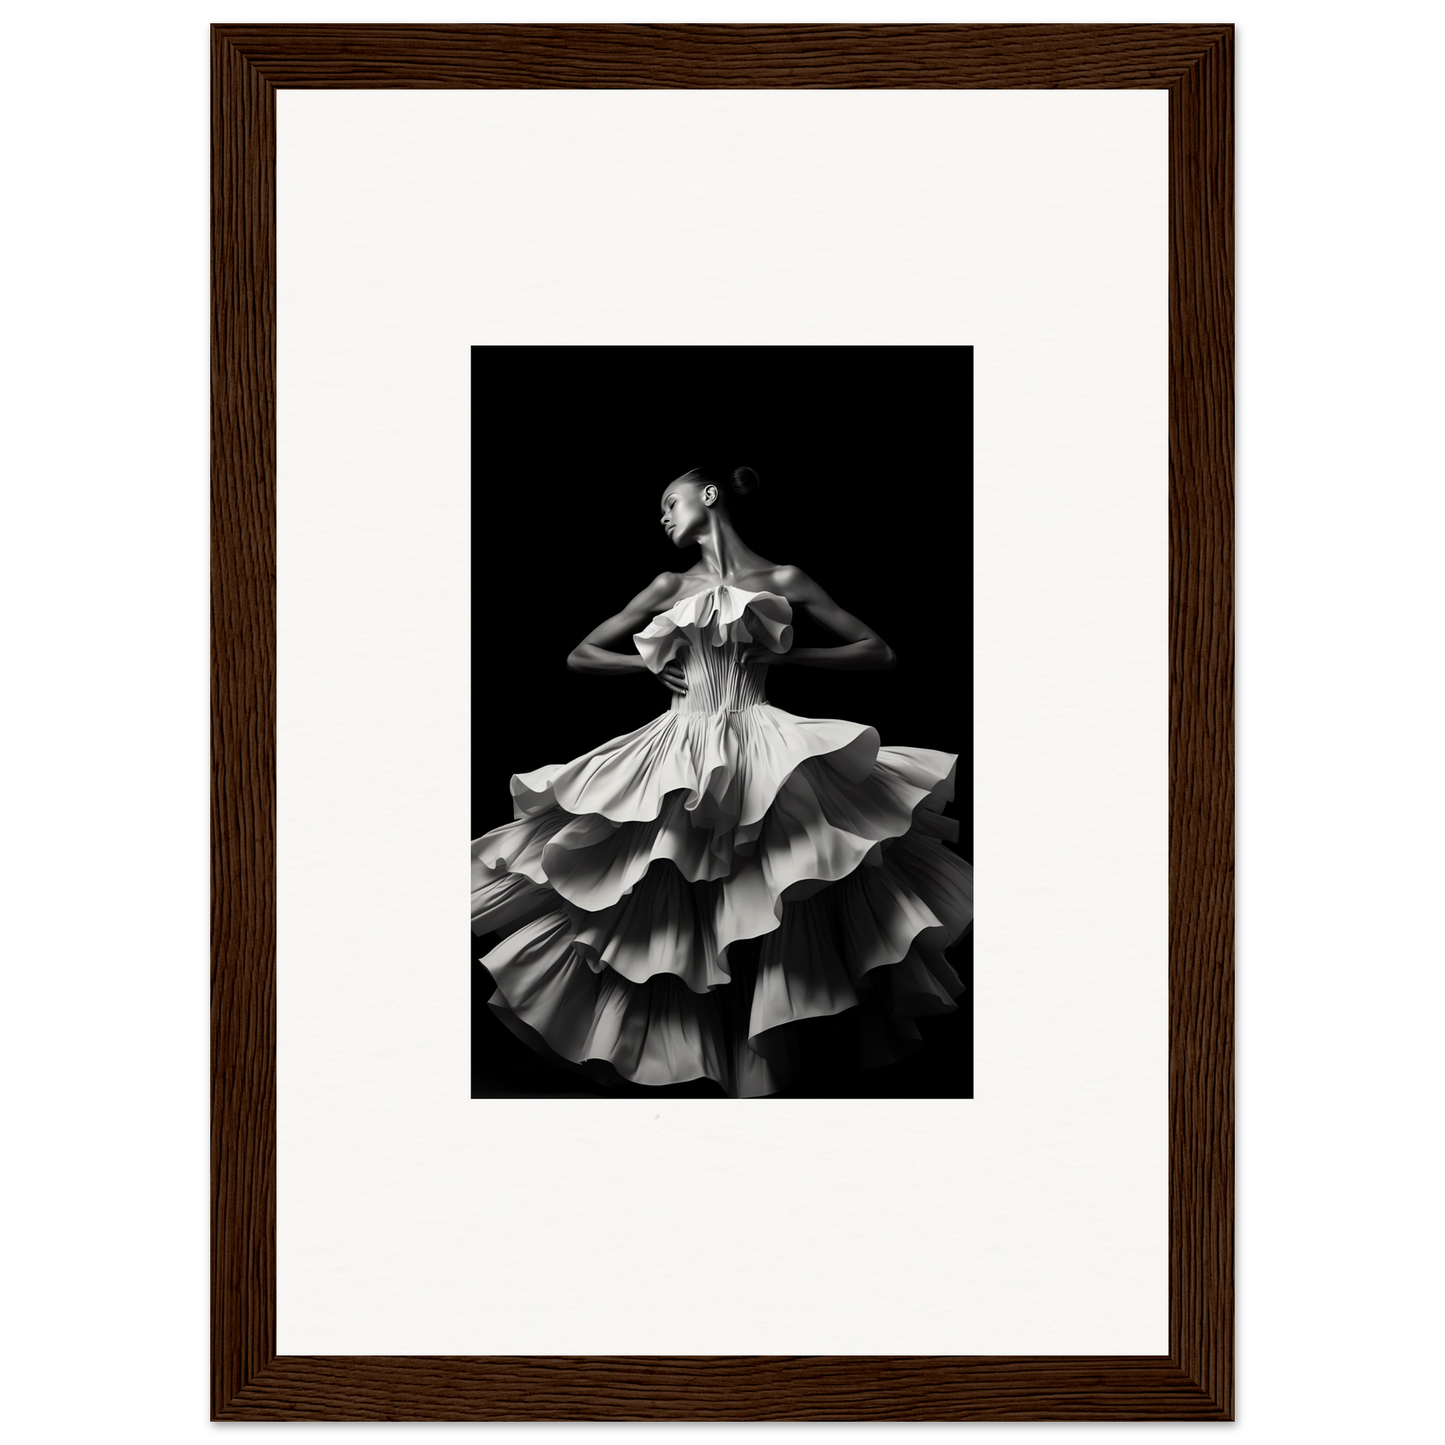 Dancers and time a2 - framed poster - a4 21x29.7 cm / 8x12″